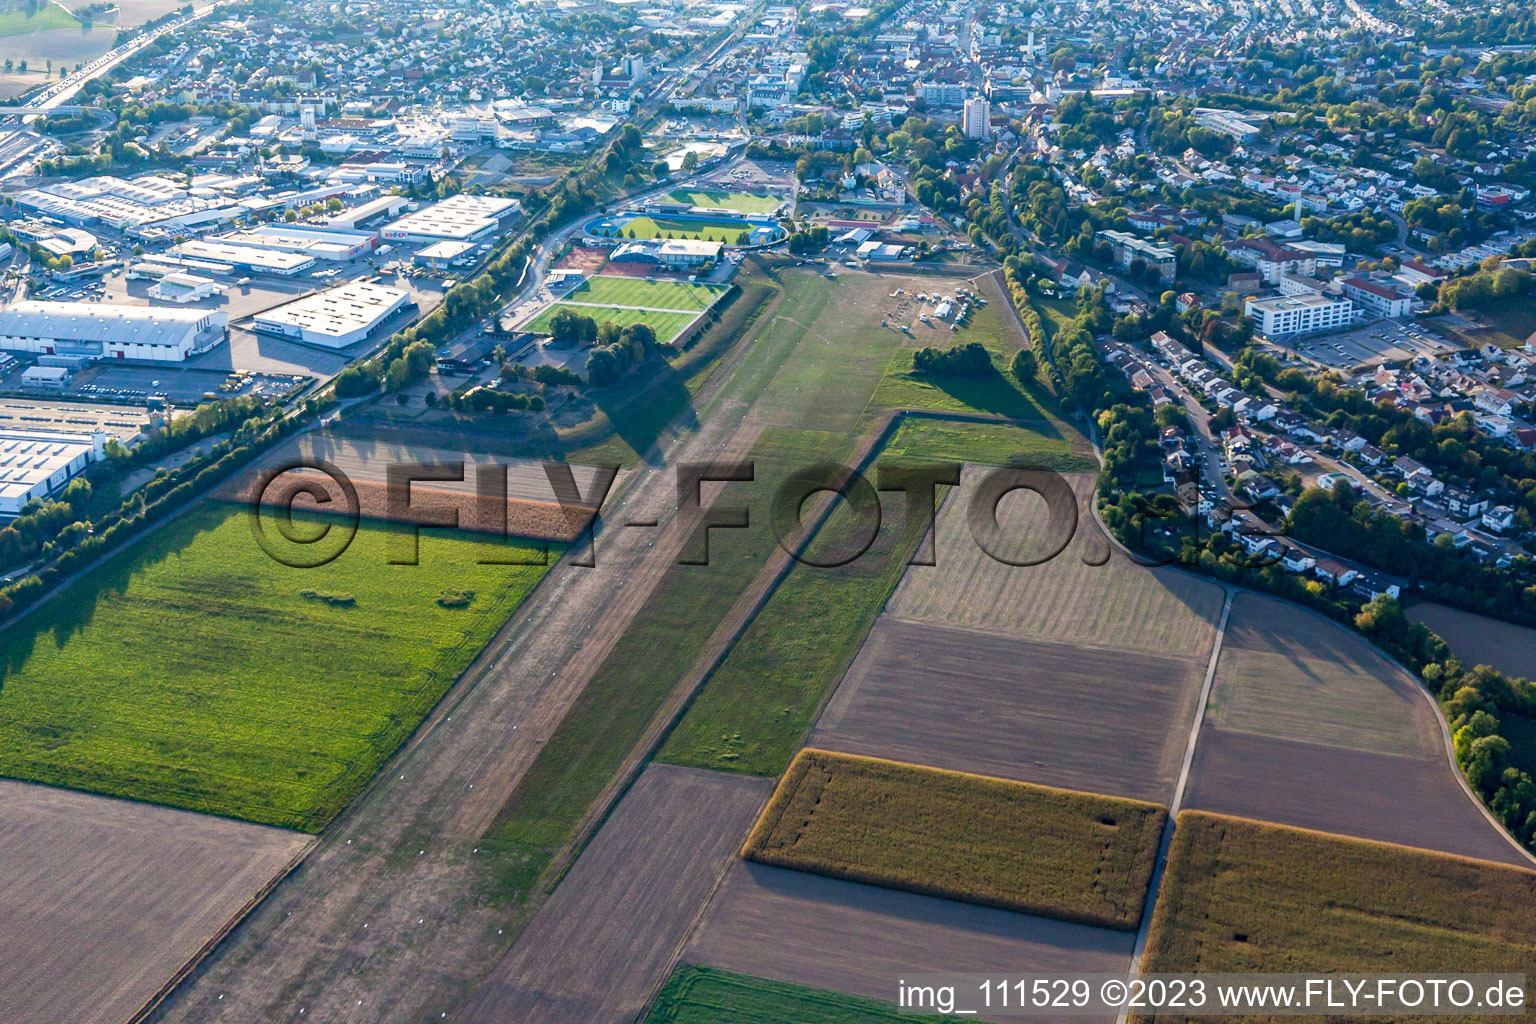 Gliding area in the district Rohrbach in Sinsheim in the state Baden-Wuerttemberg, Germany